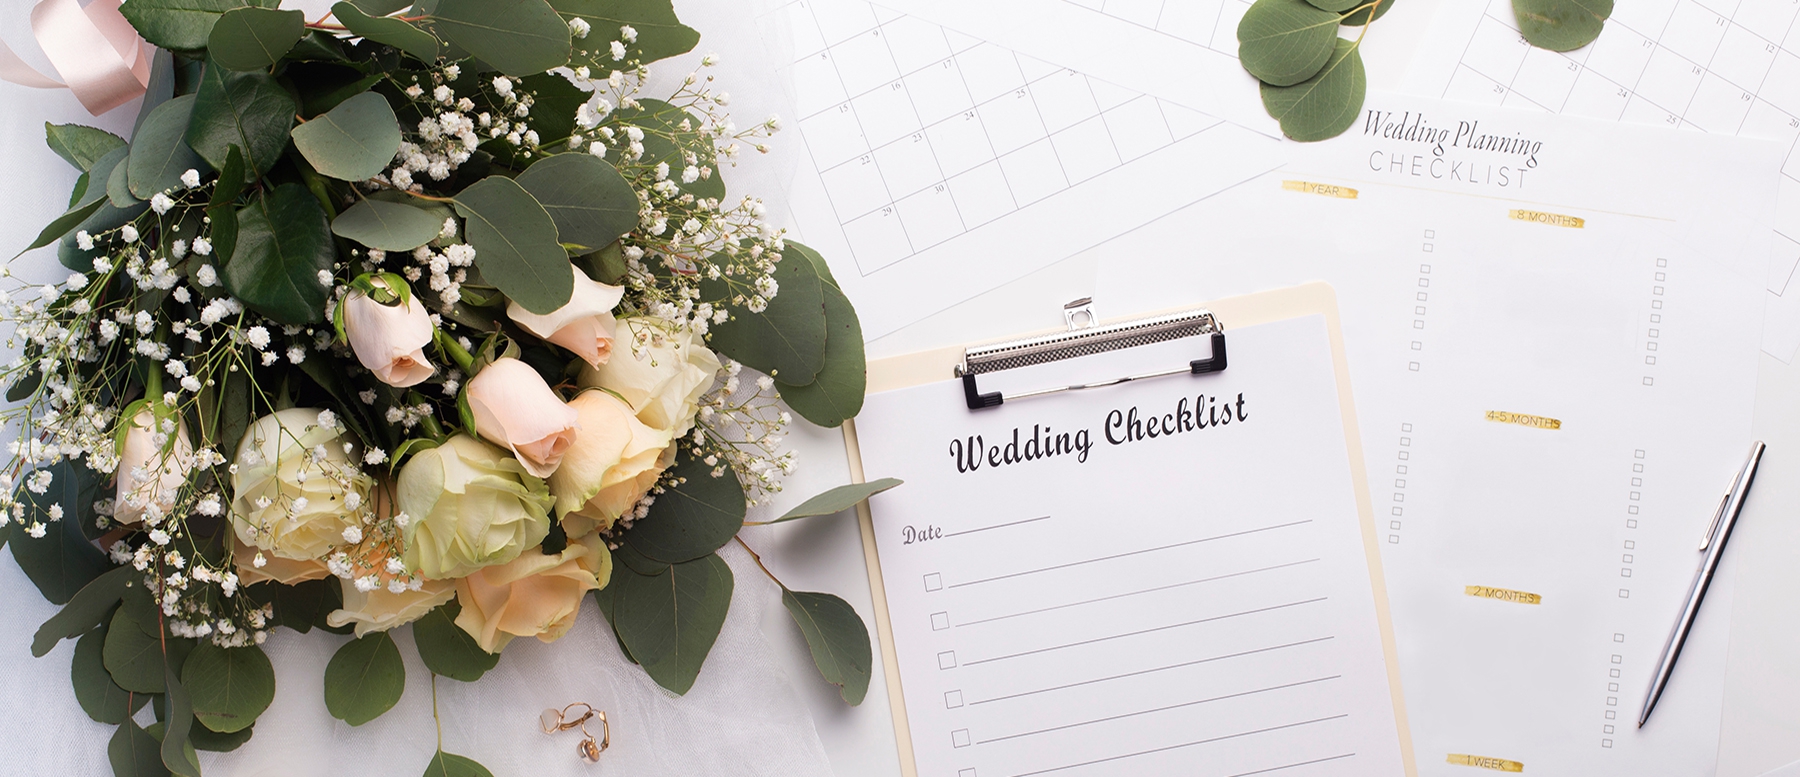 Planning a Wedding Involves Saving and Keeping Track of Costs